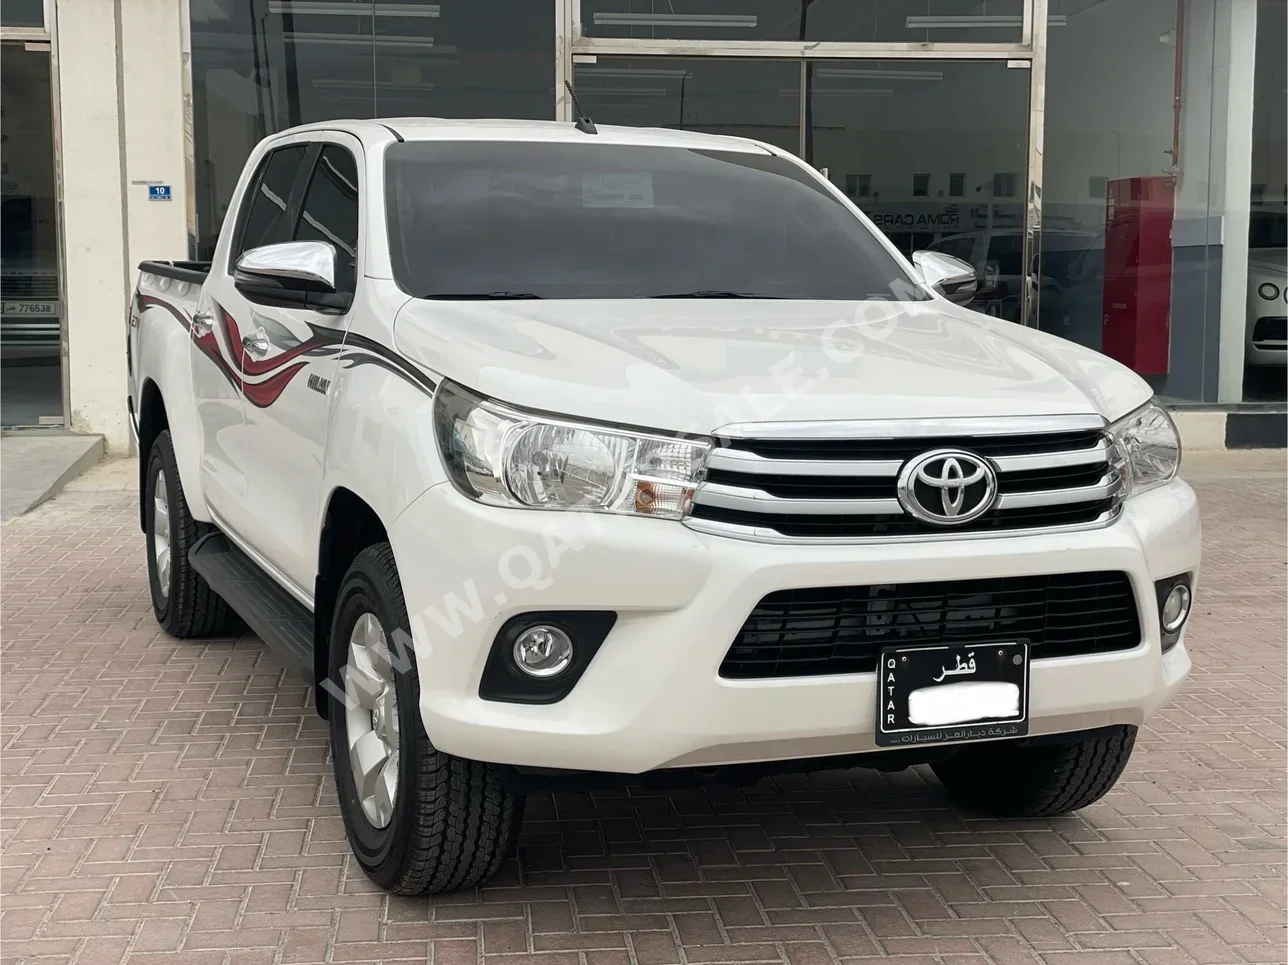 Toyota  Hilux  SR5  2018  Manual  83,000 Km  6 Cylinder  Four Wheel Drive (4WD)  Pick Up  White  With Warranty